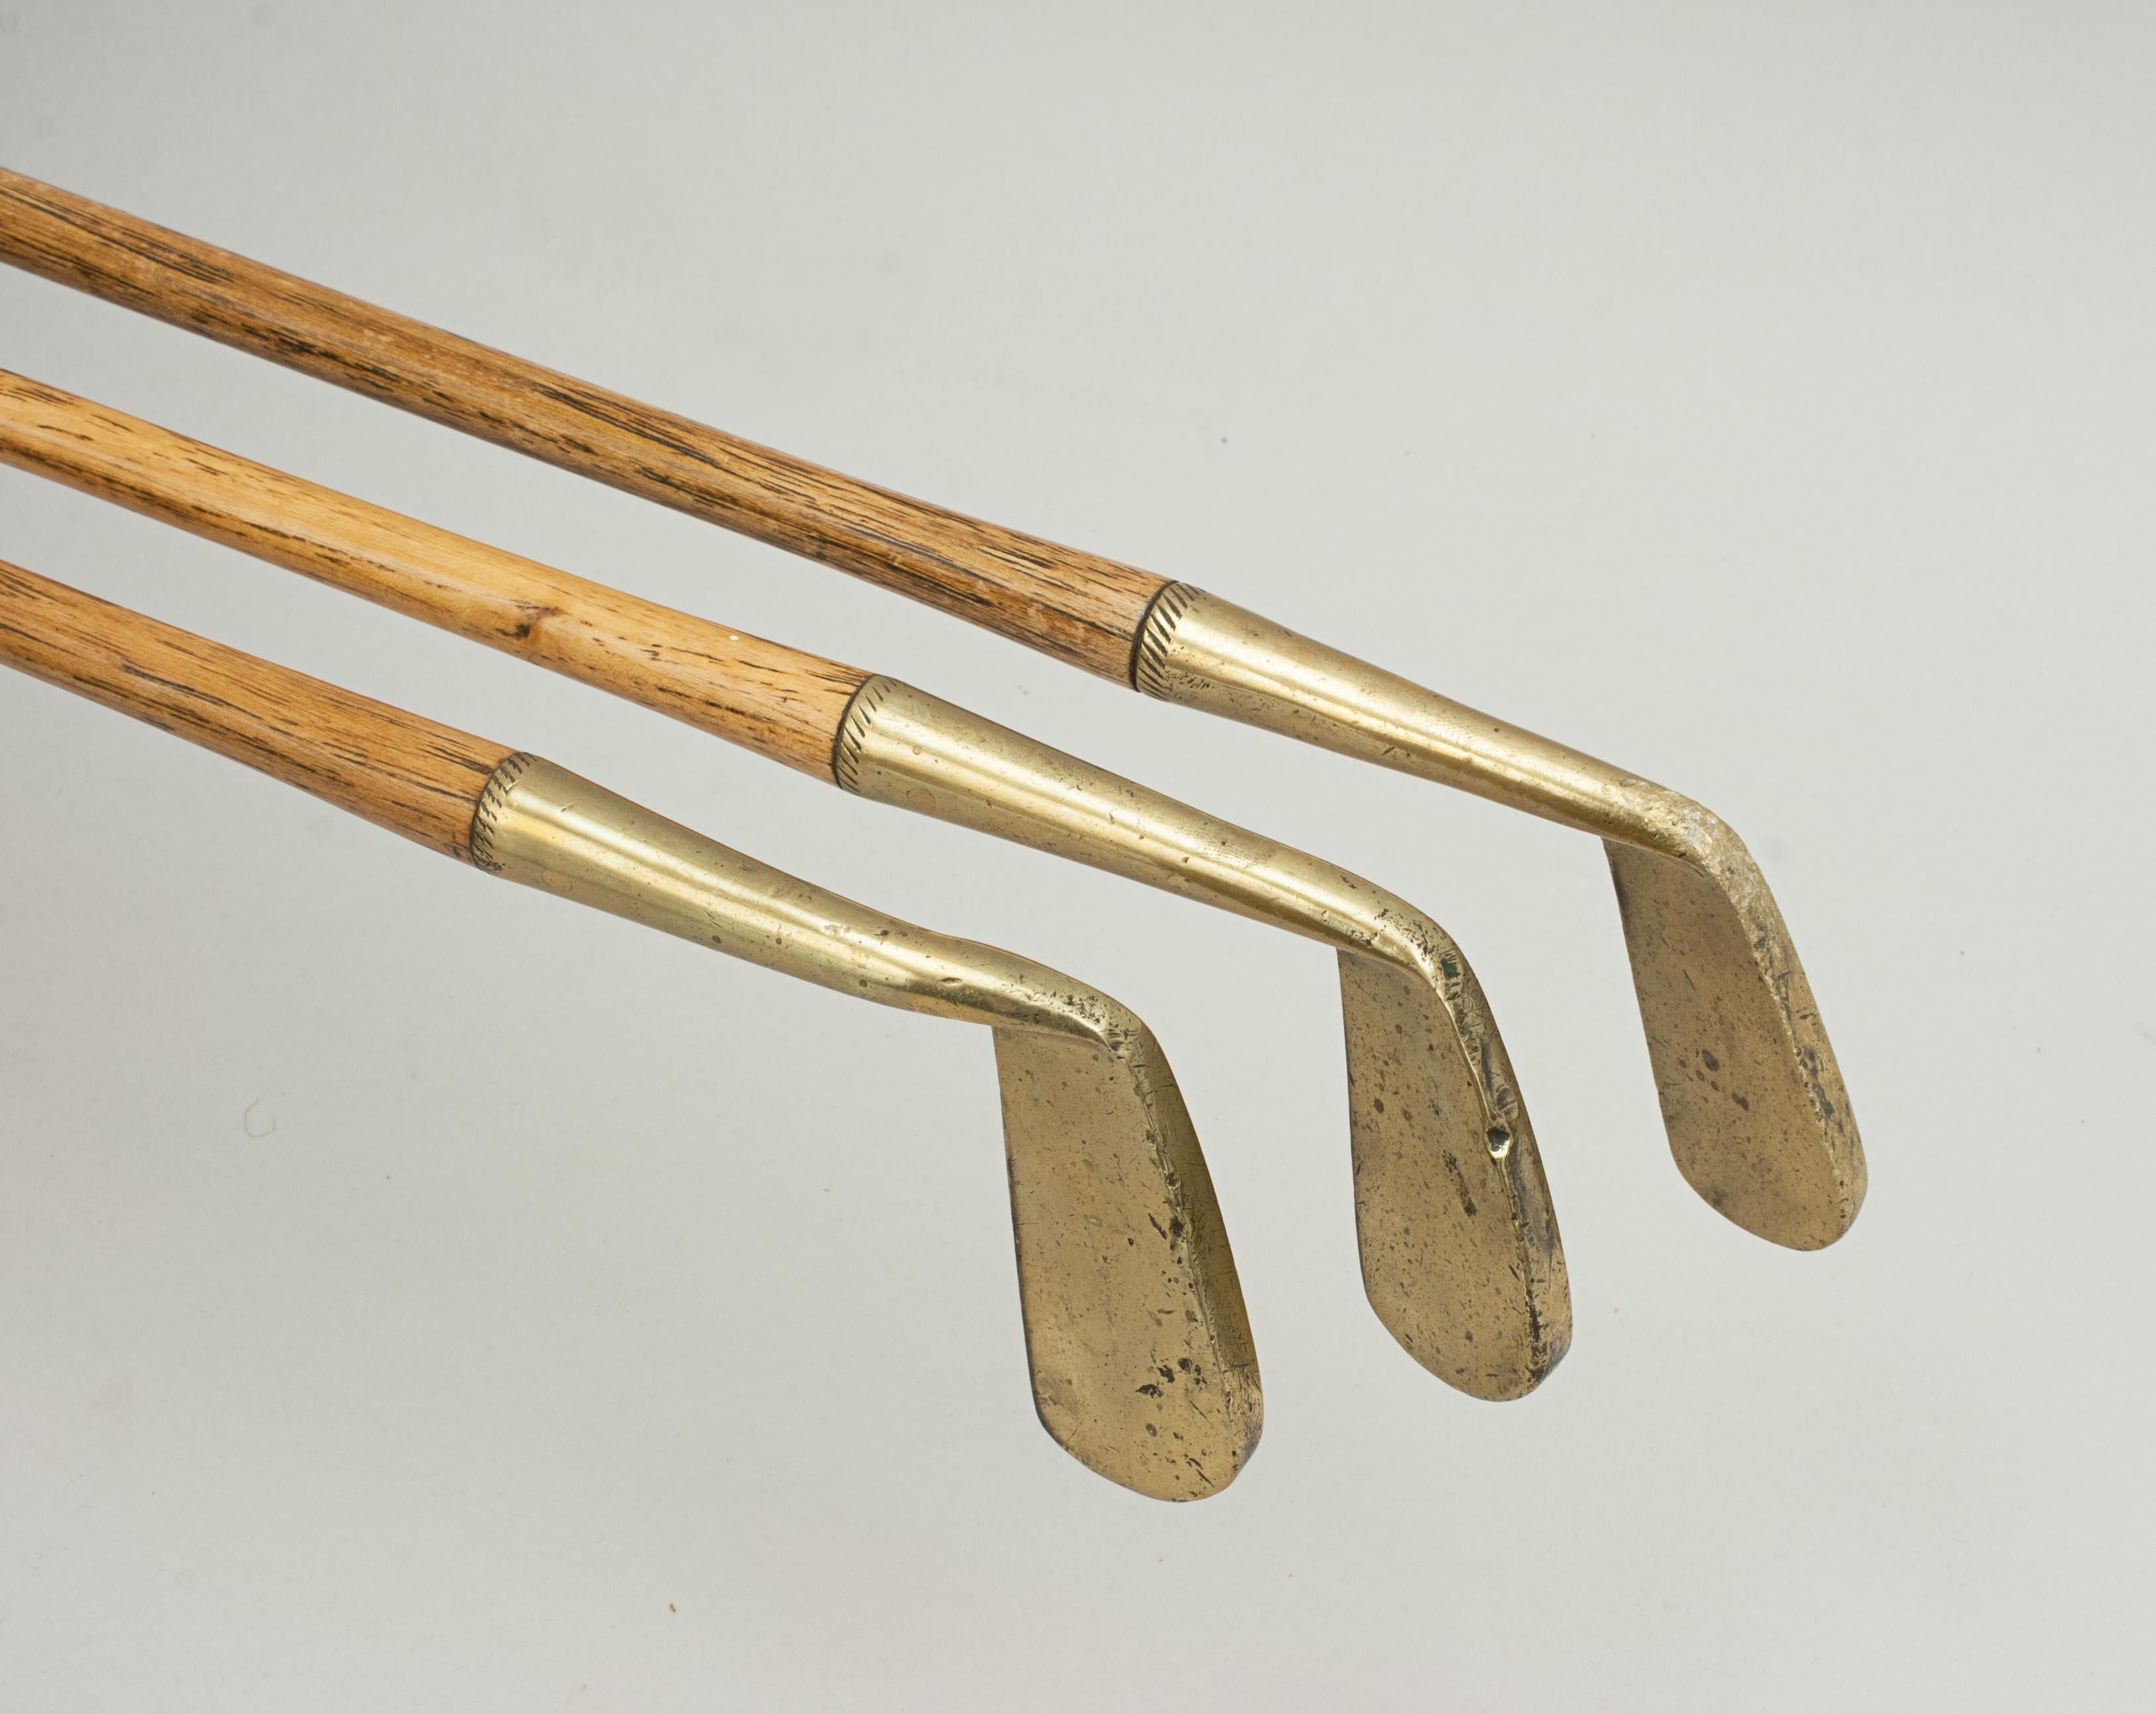 Vintage Set of Three Child's Golf Clubs by Halley & Co In Good Condition For Sale In Oxfordshire, GB